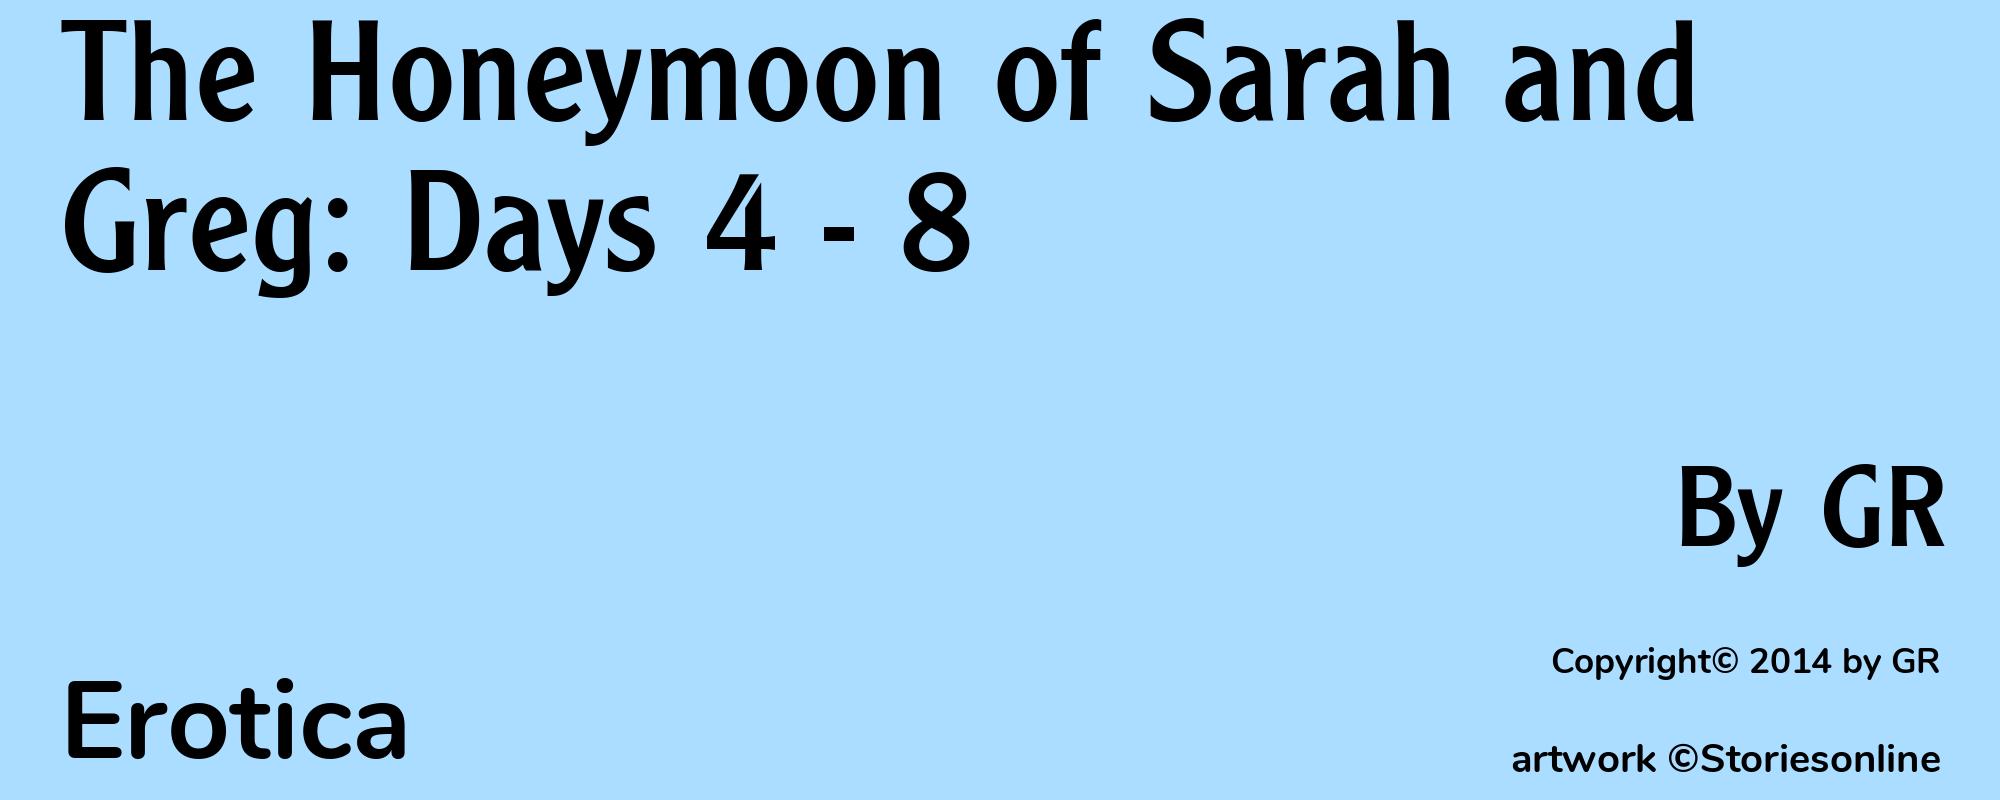 The Honeymoon of Sarah and Greg: Days 4 - 8 - Cover